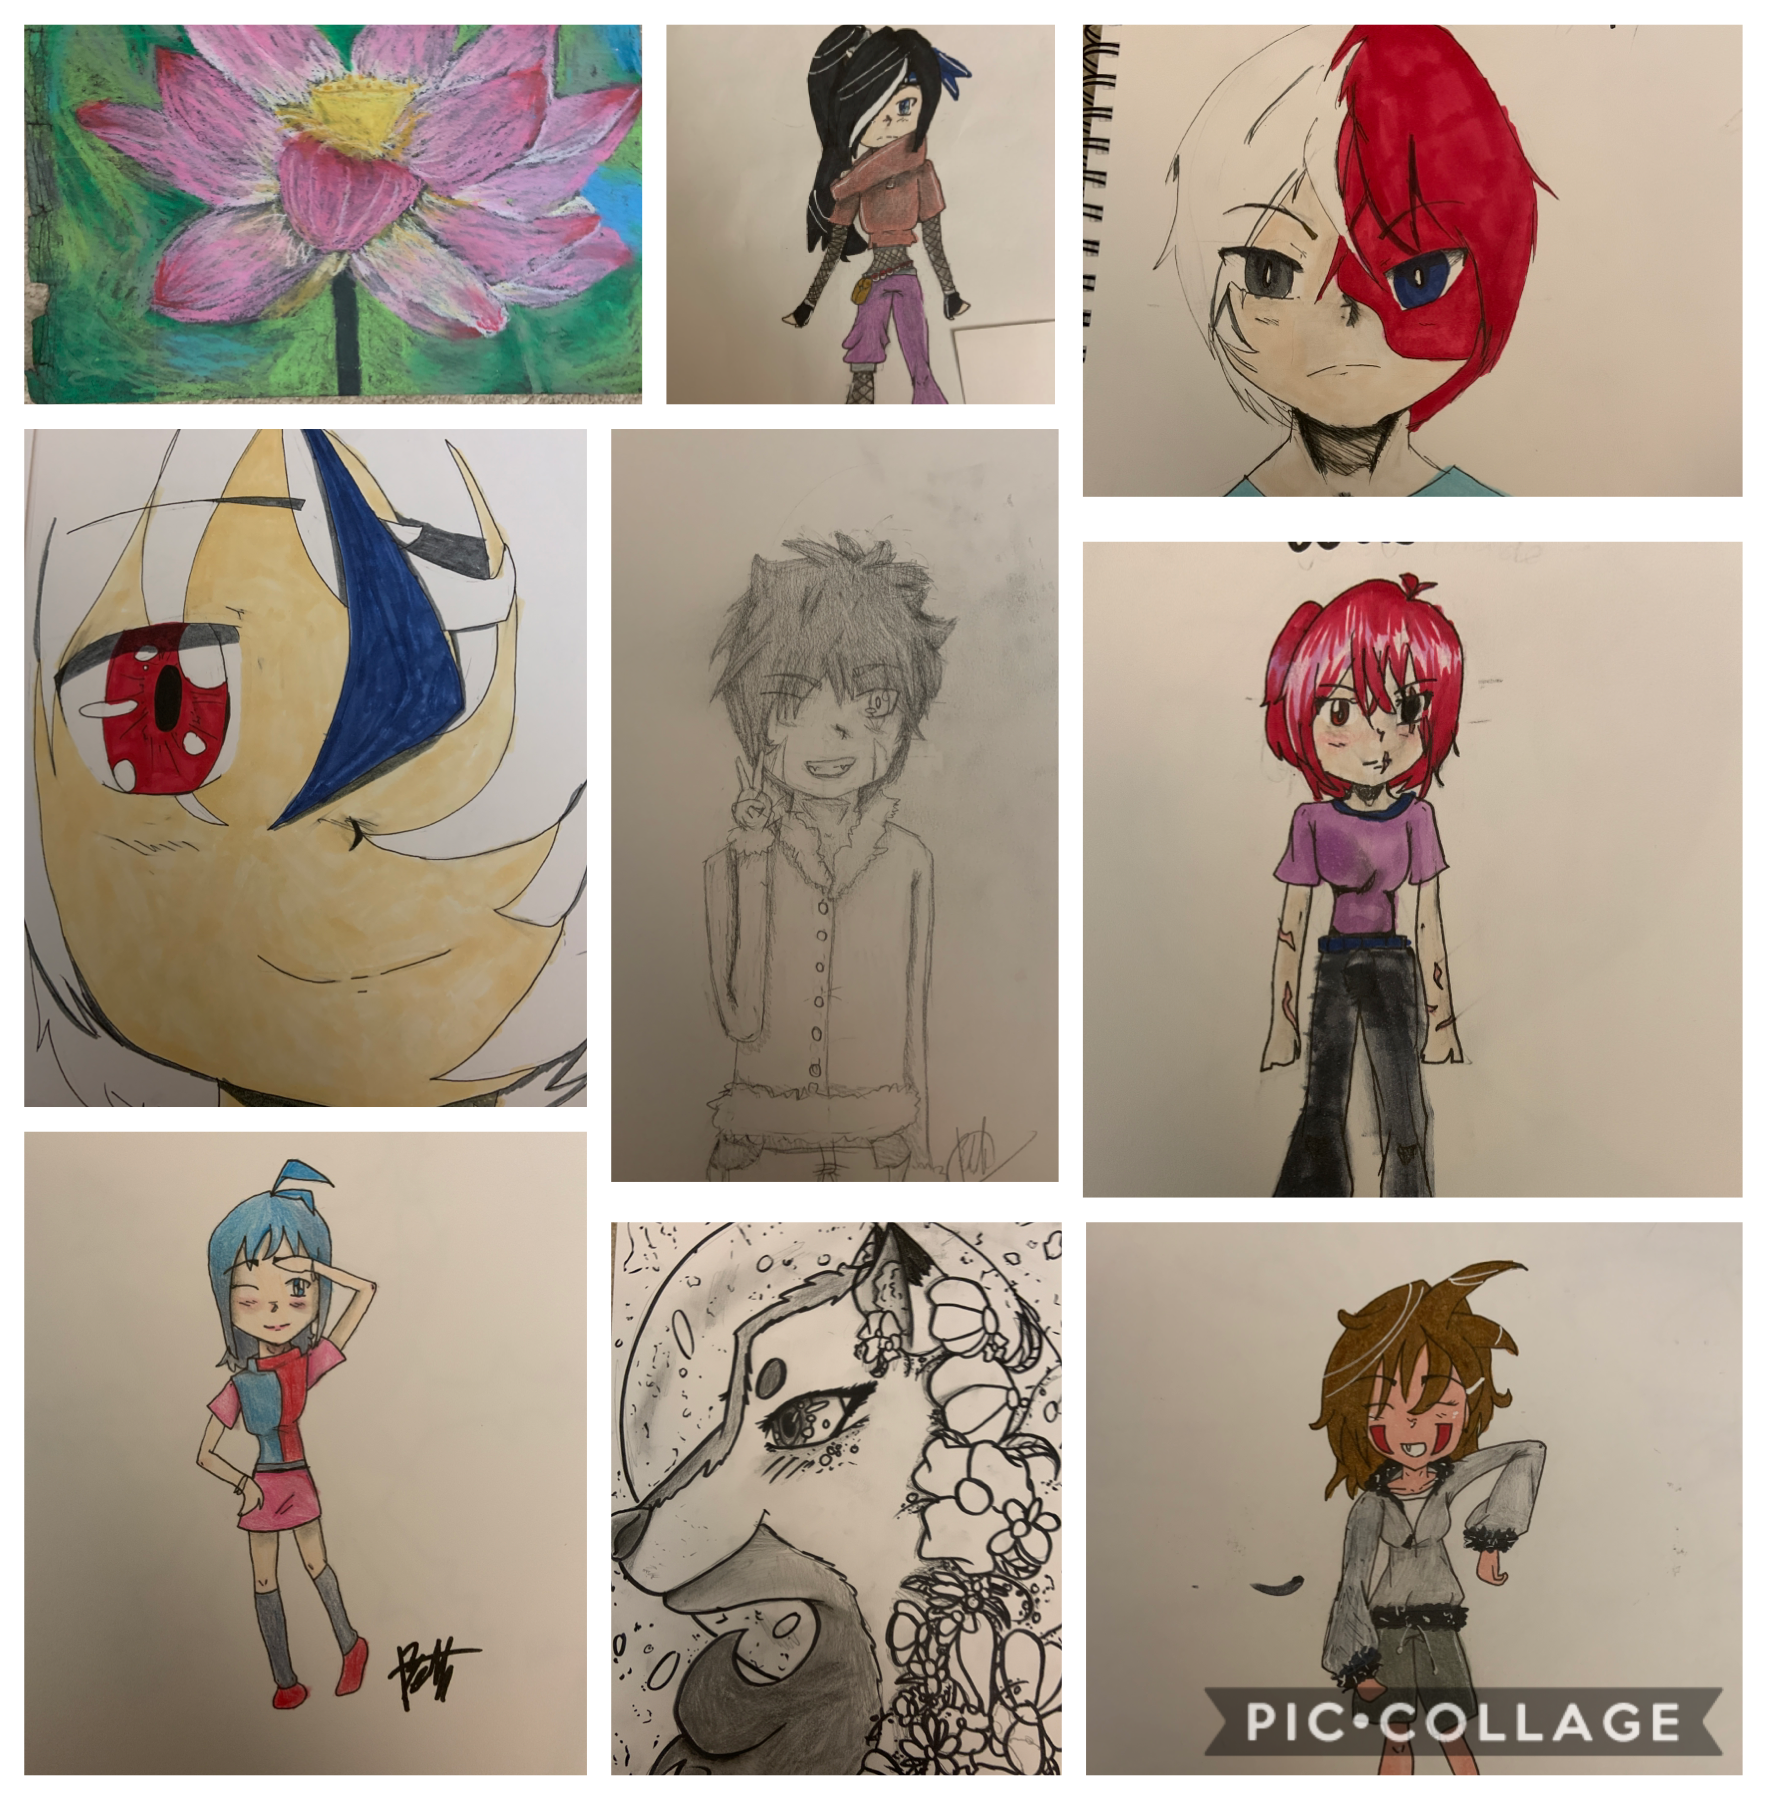 From top left to bottom right, flower using pastels, my favorite Naruto/Pokémon mashup oc, Tora, Shoto Todoroki, a random boy face, Kiba from Naruto but I messed up the marks, my other oc, Kori, random girl, random wolf with flowers and shells, gender-ben